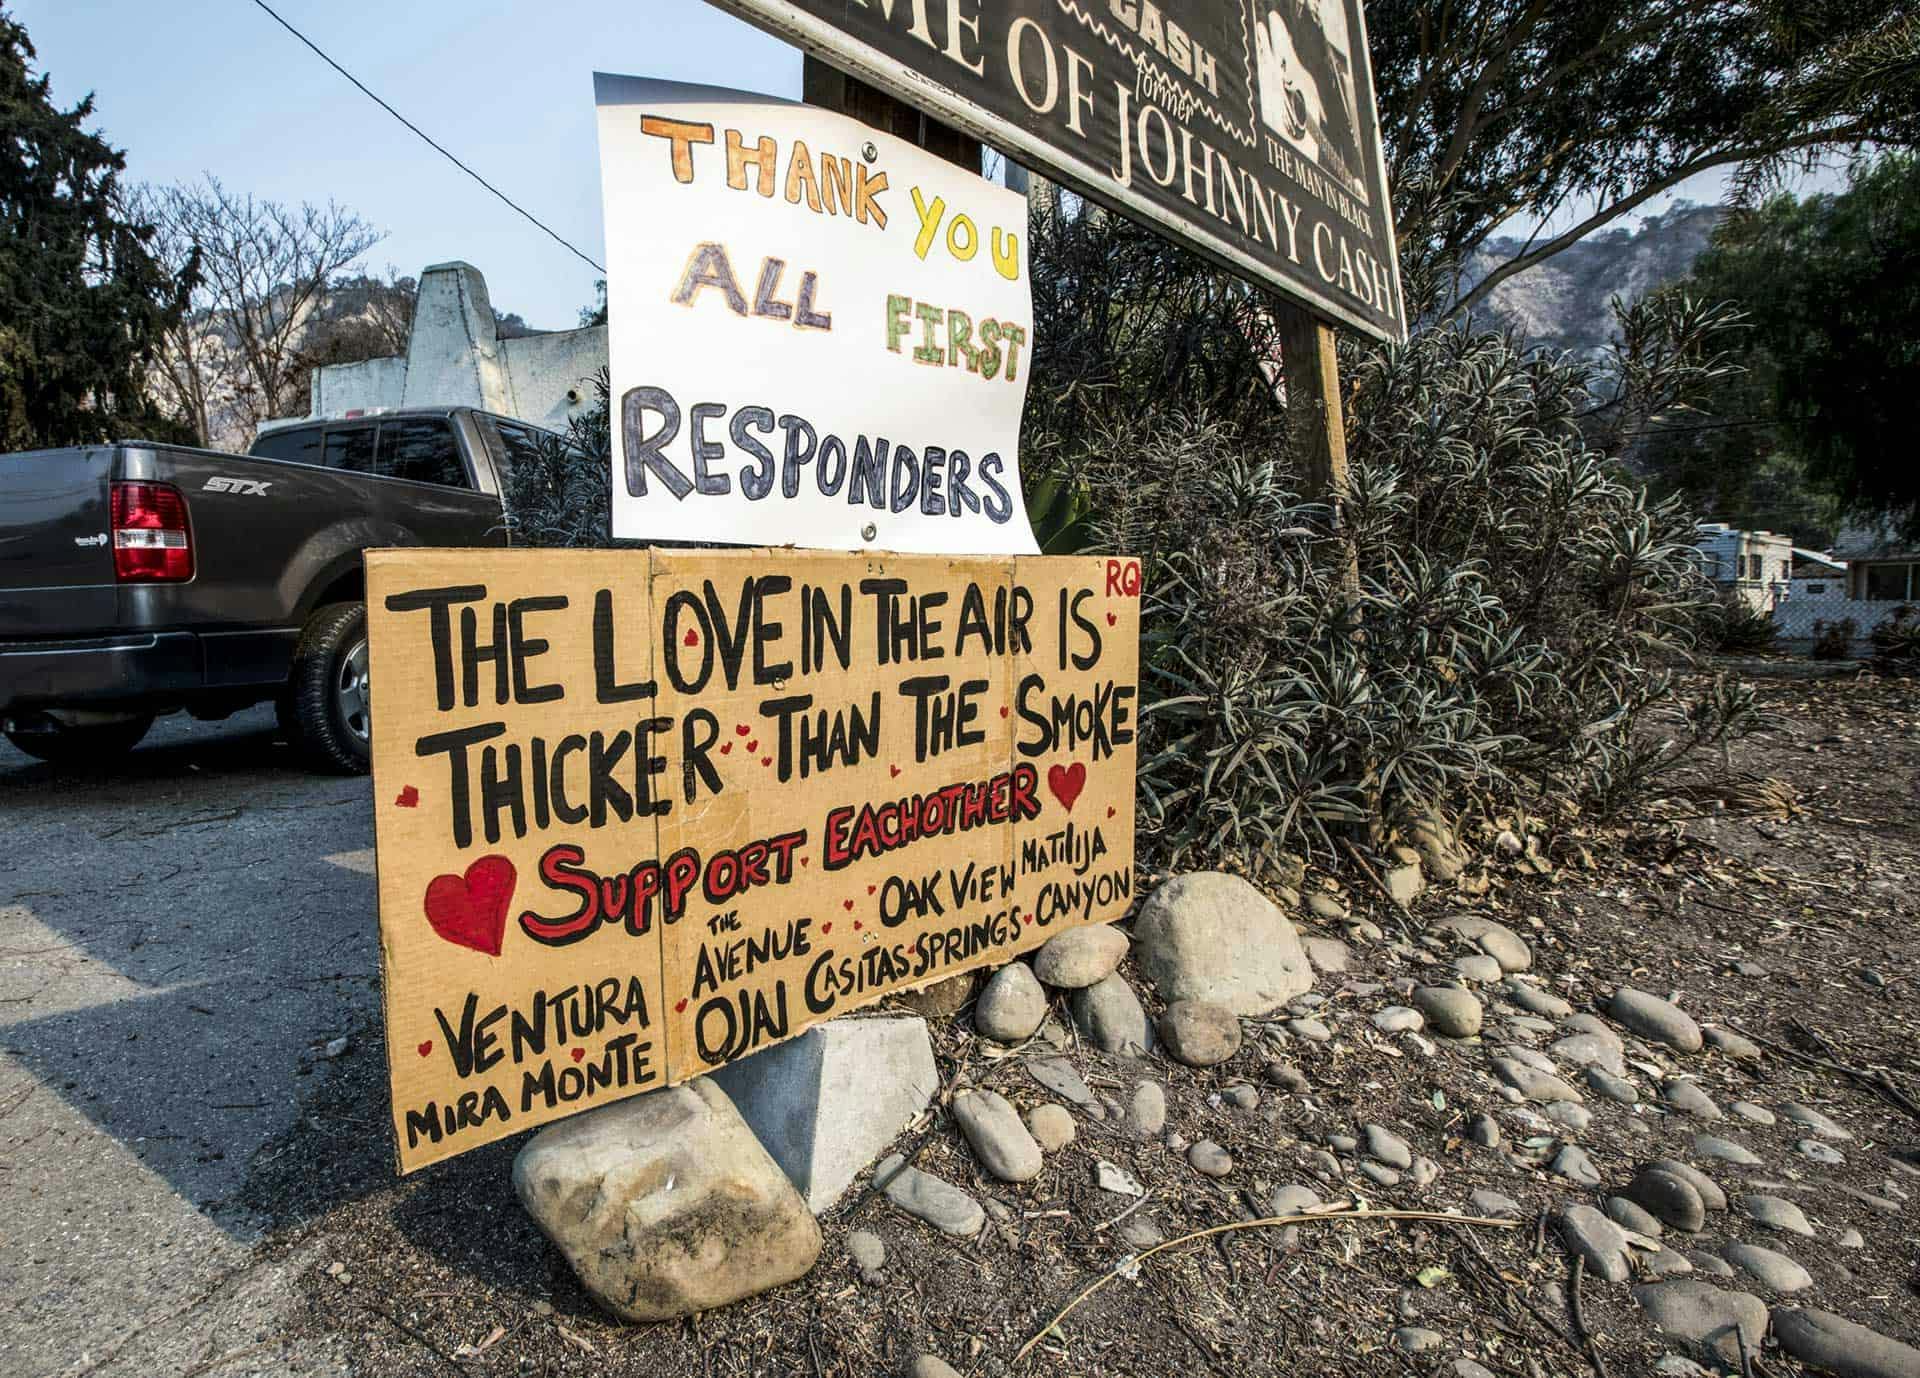 <p>“The Love in the Air is Thicker Than the Smoke.” This kind of signage was everywhere showing gratitude and support.</p>
